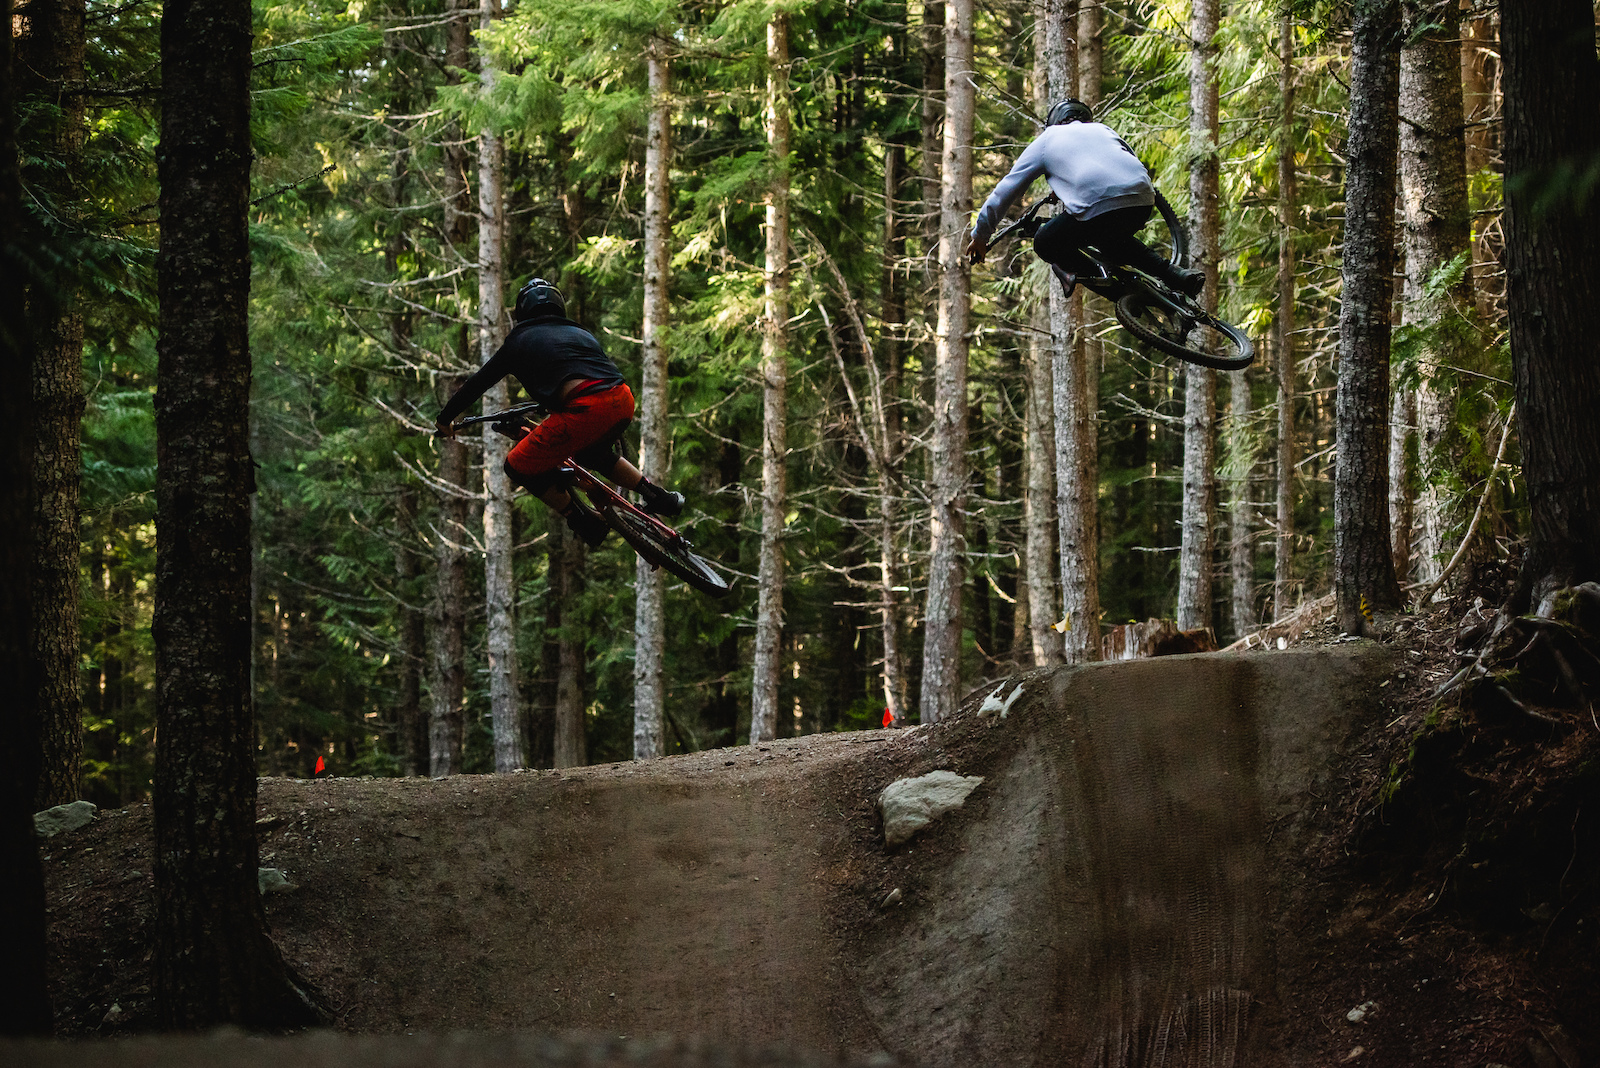 Video First Impressions of the 2019 Whistler Bike Park with Jason